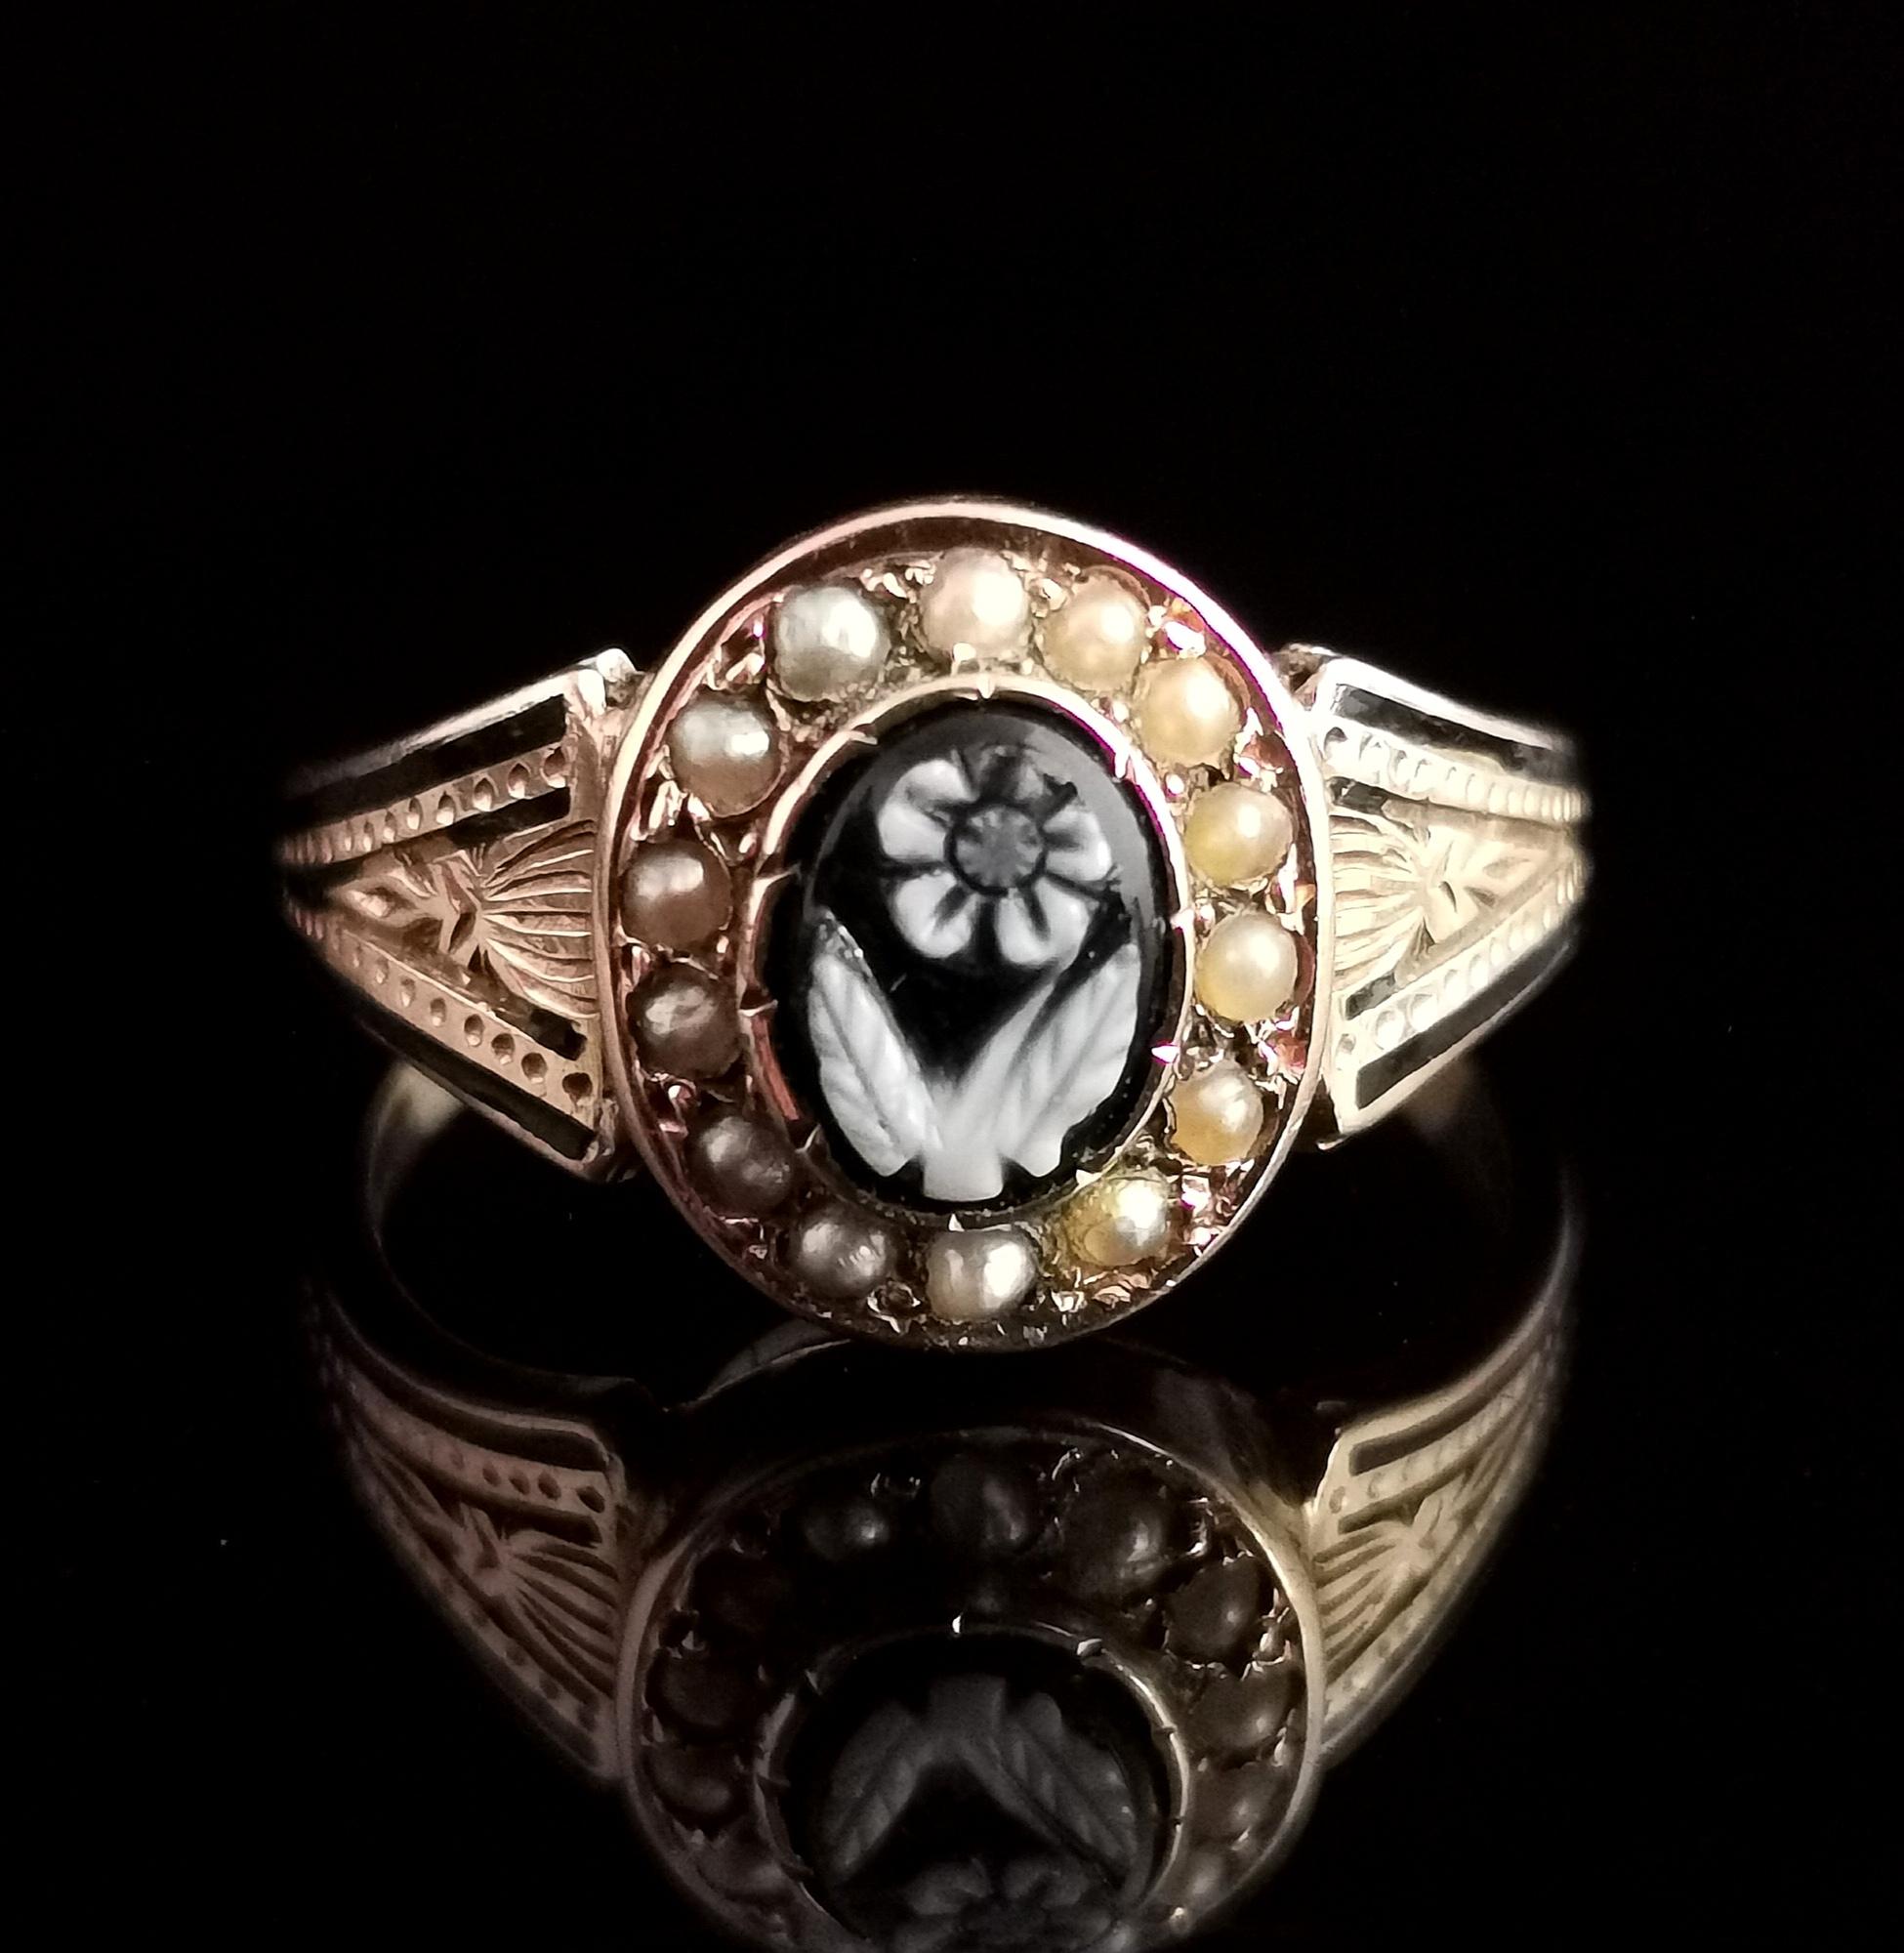 A stunning antique Victorian mourning ring.

If you are looking for a mourning ring that is filled with sentiment and symbolism then this is the one for you.

A rich 15 karat yellow gold engraved band with black enamel highlights, the centre has an